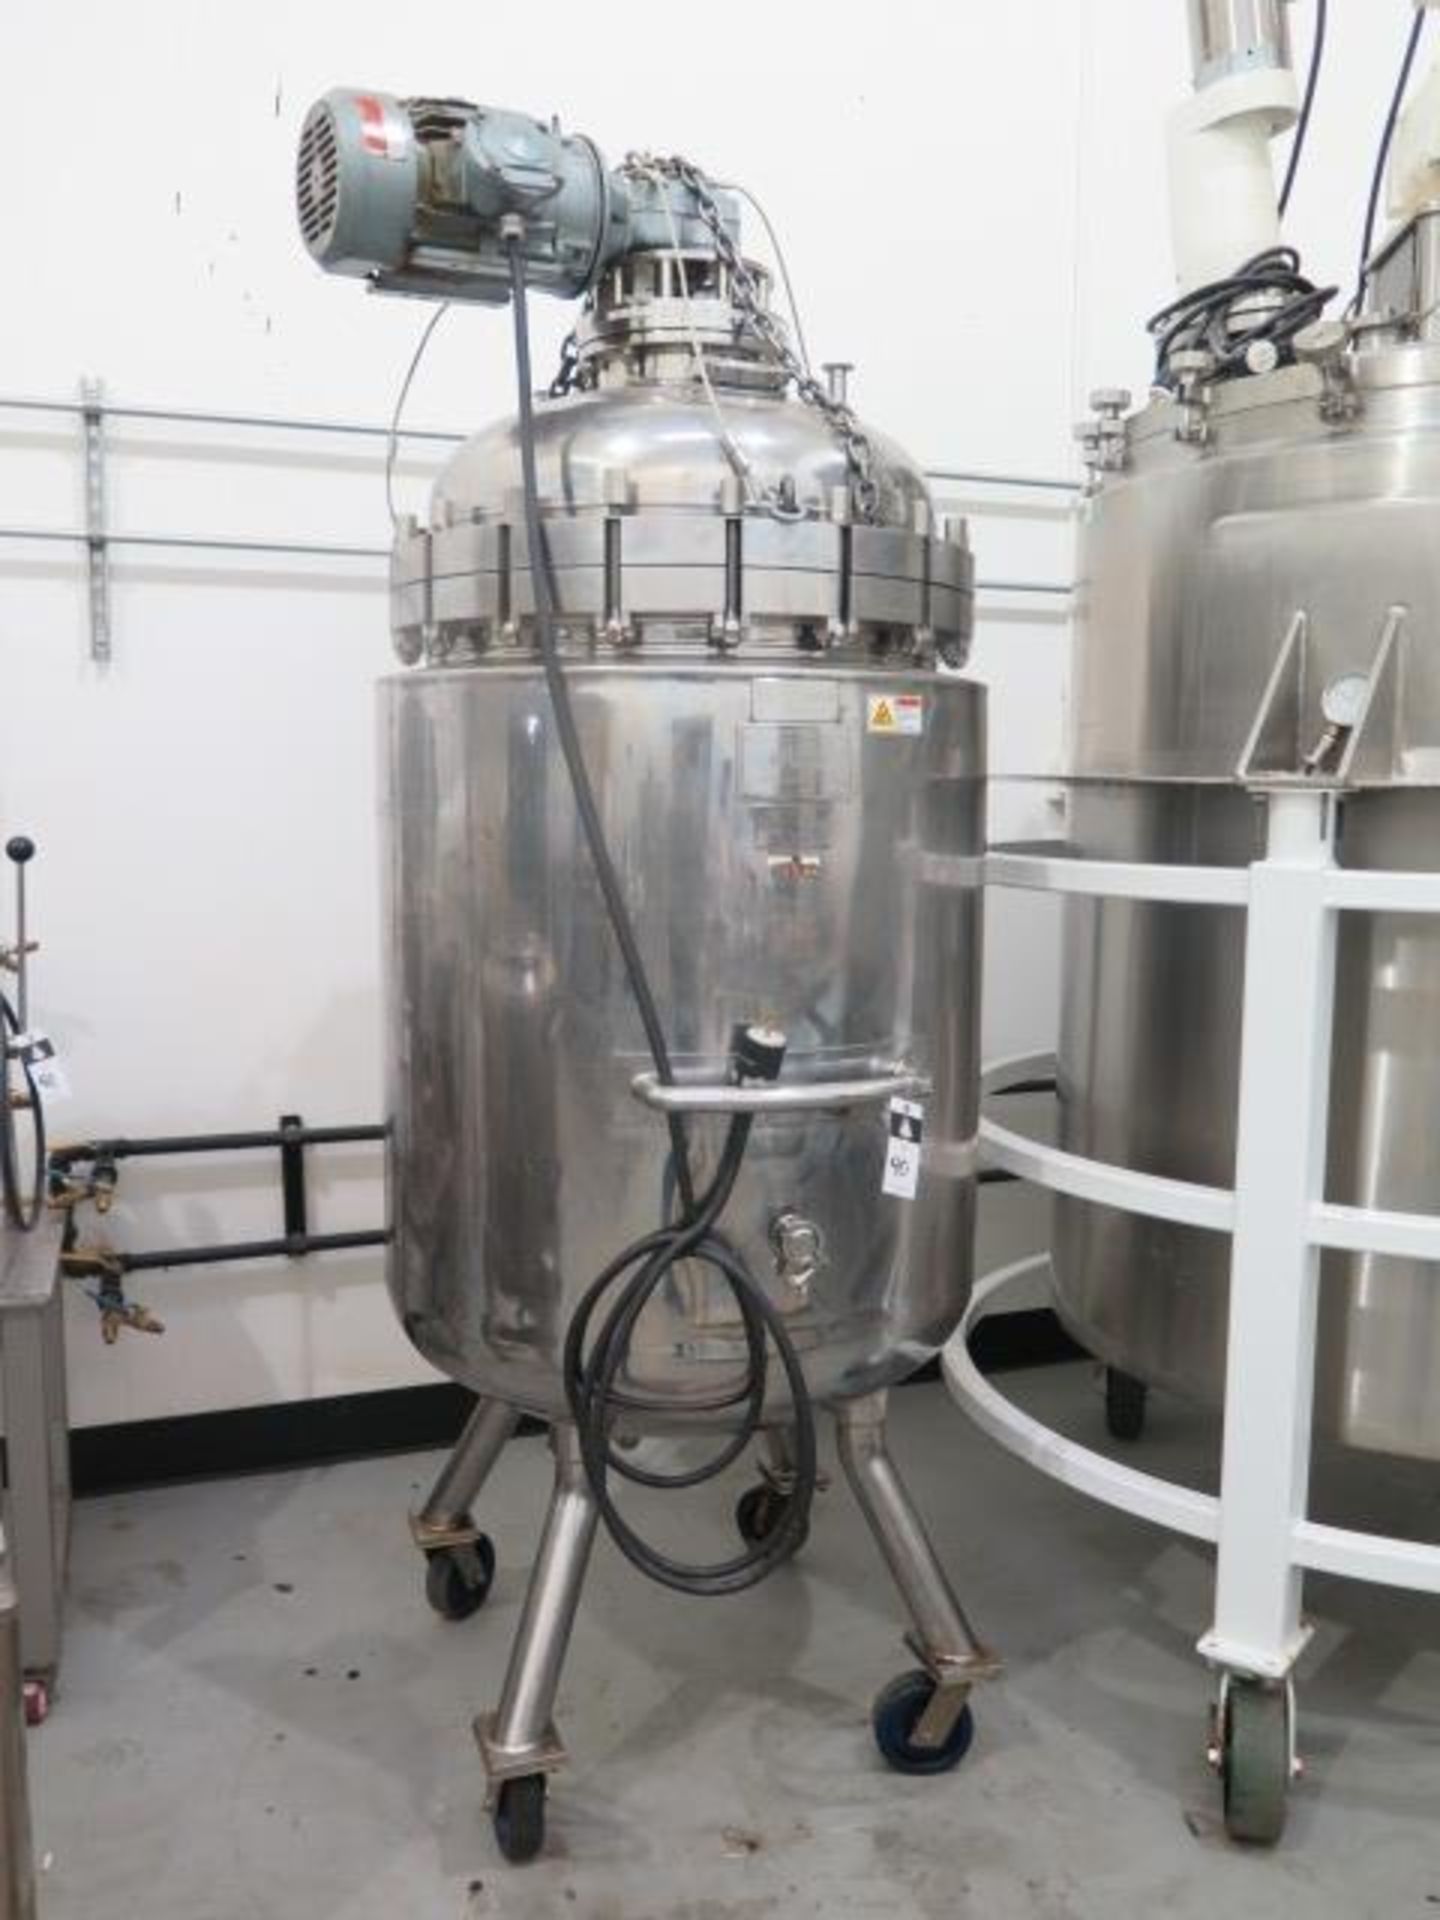 2006 DM Stainless Inc. / Olsa Stain Steel Jacketed Pressurized Mixing Tank s/n 2081 w/ SOLD AS IS